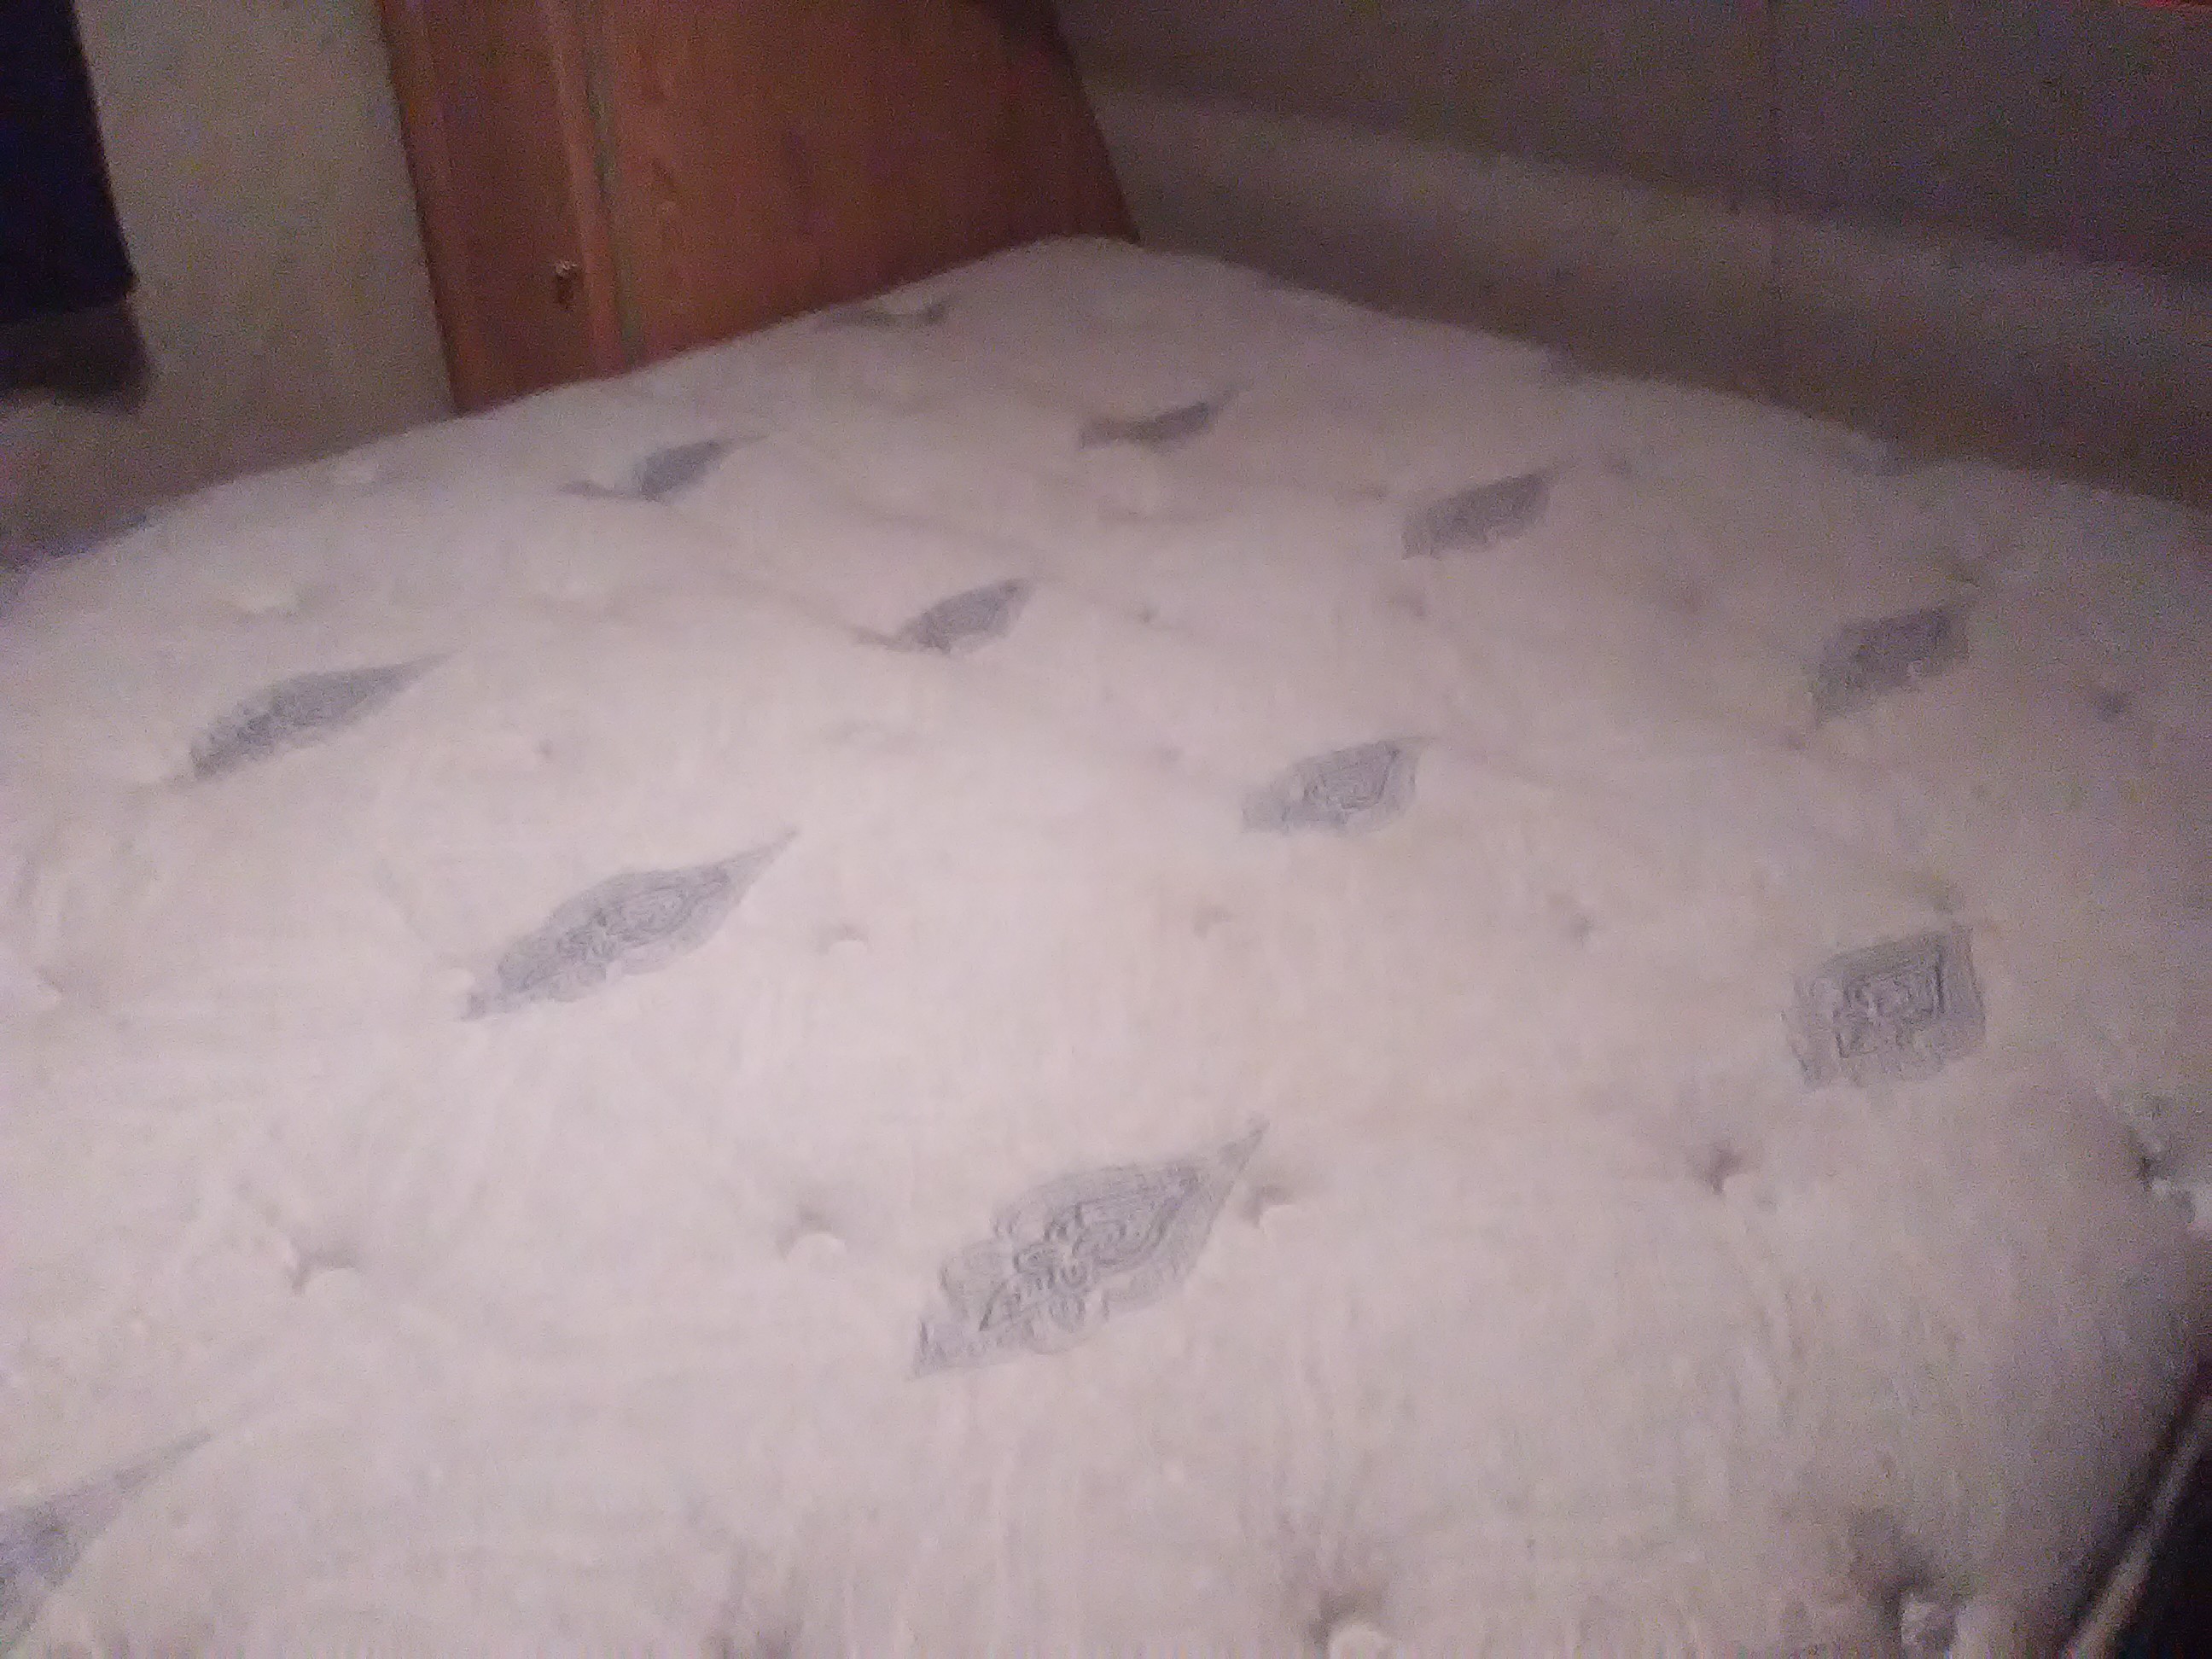 how mattress looks now that they wont take back